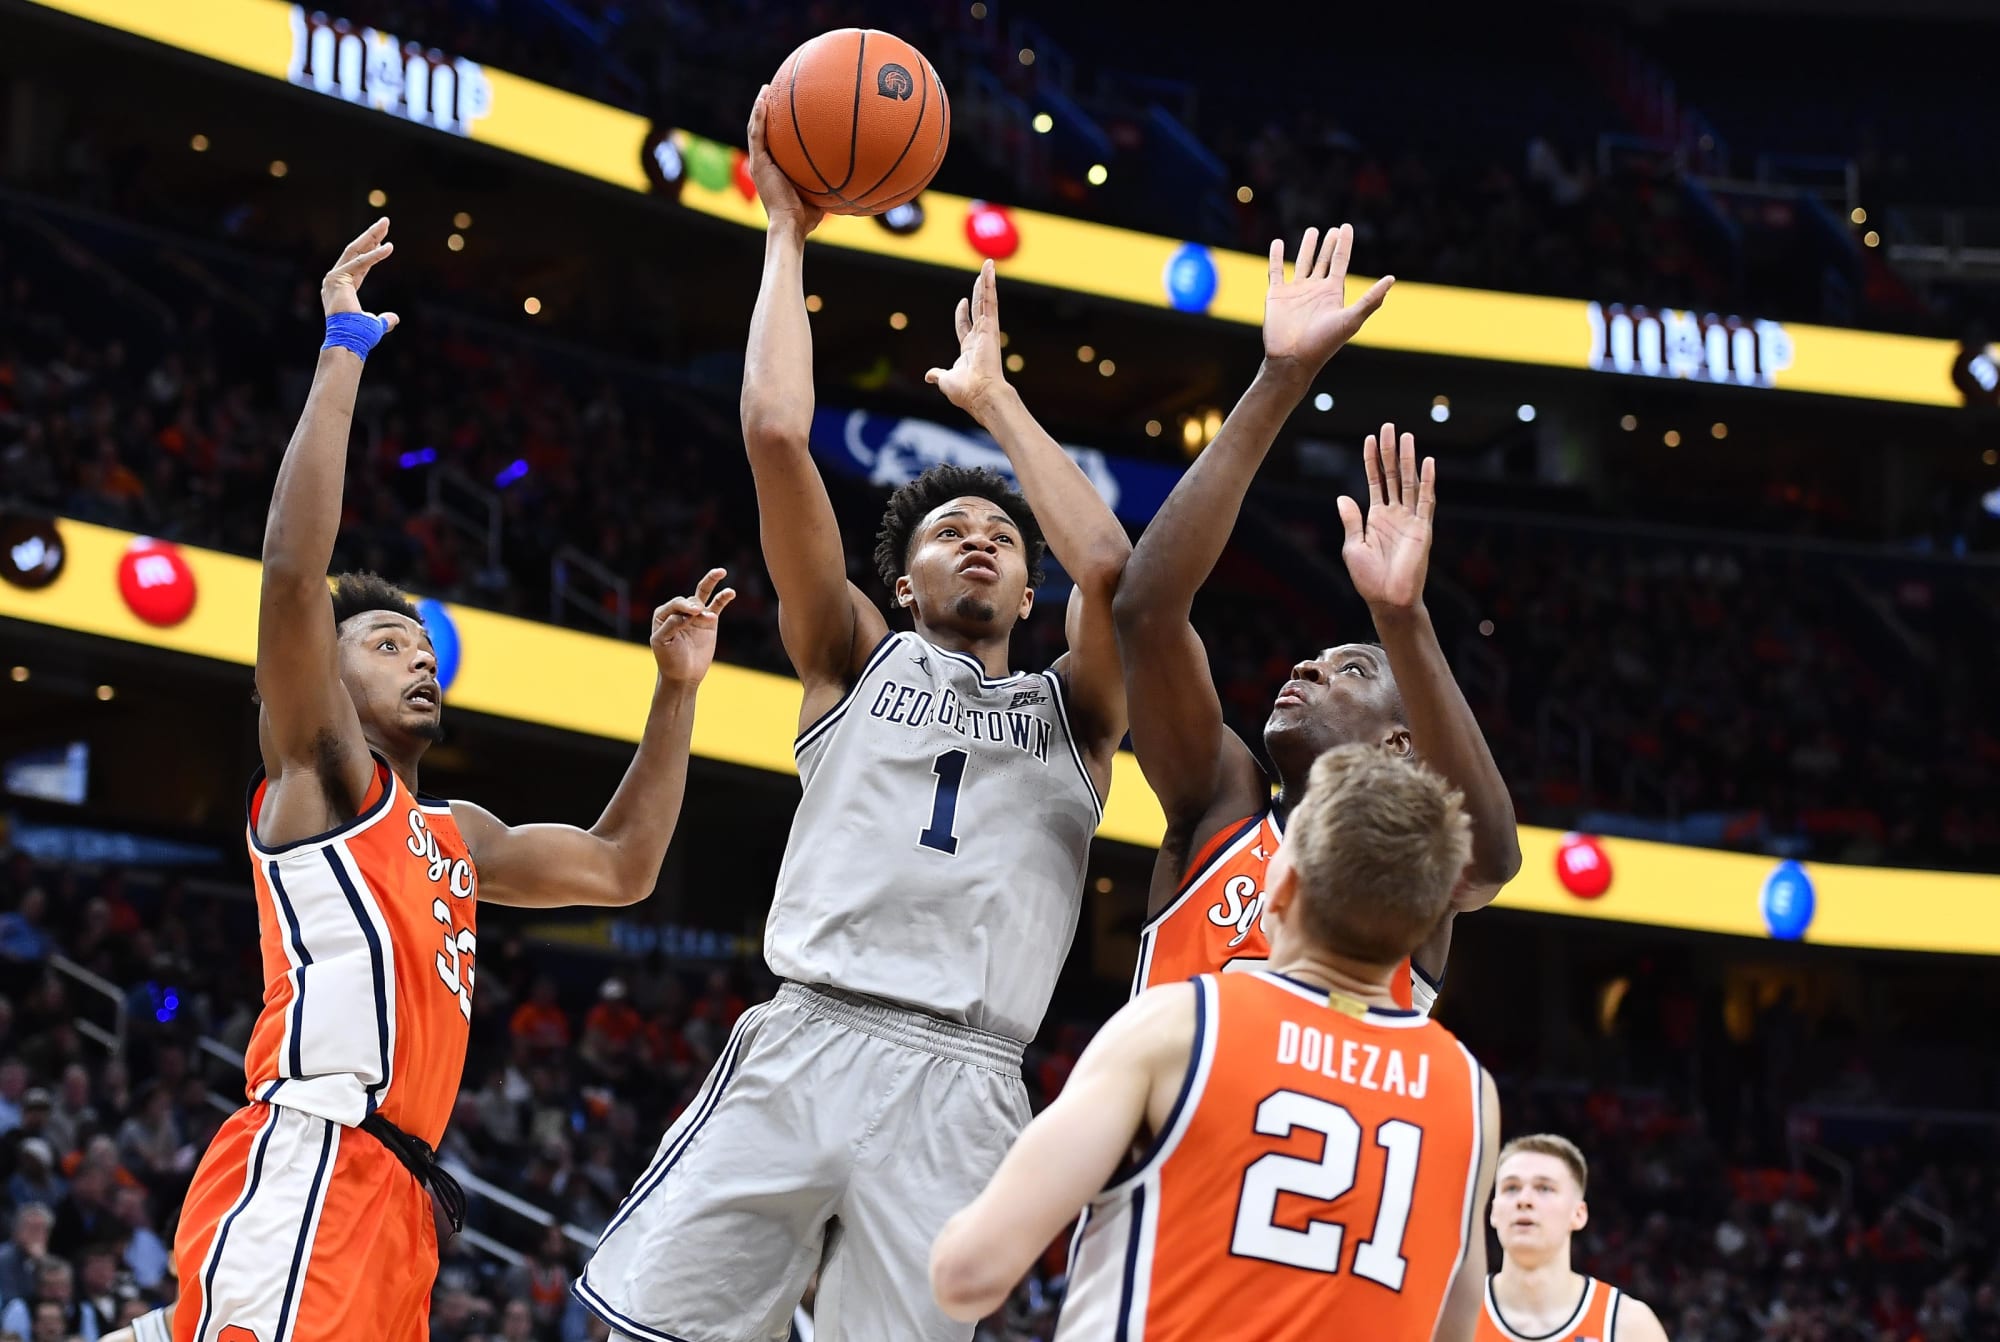 Georgetown vs Syracuse: 2020-21 basketball game preview, TV schedule